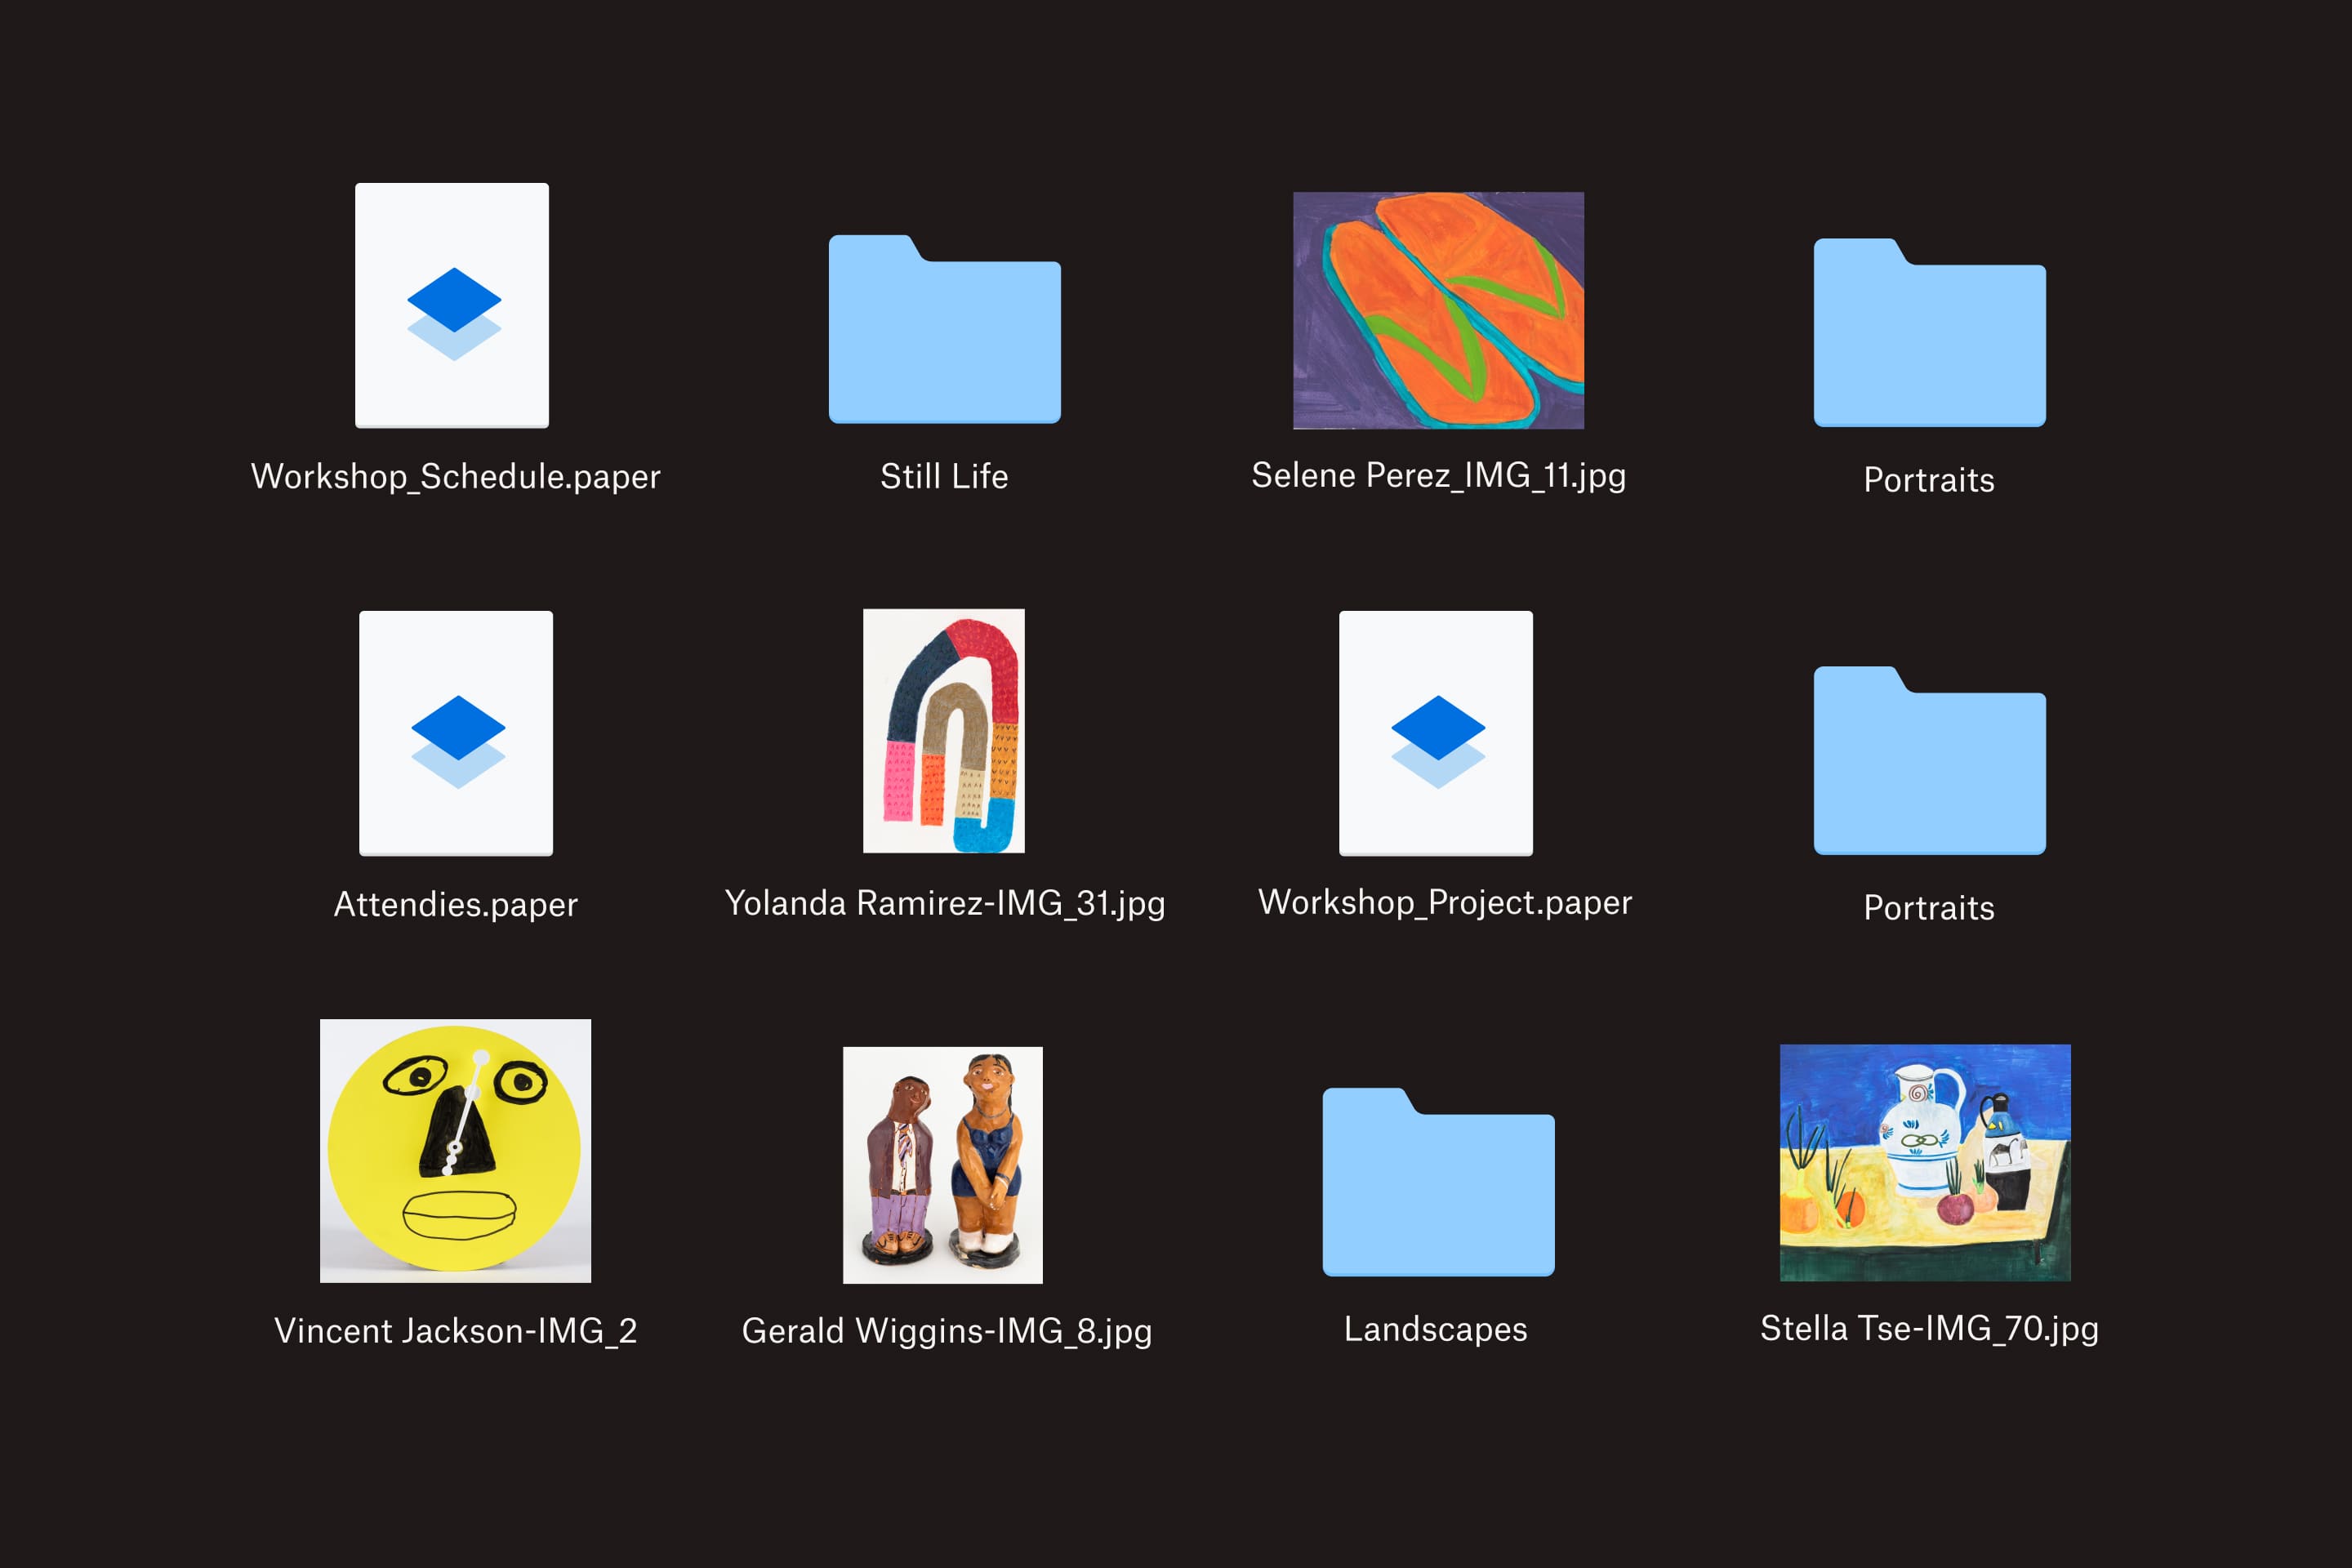 Twelve files and folders in Dropbox, which include images of art, workshop details and portraits.